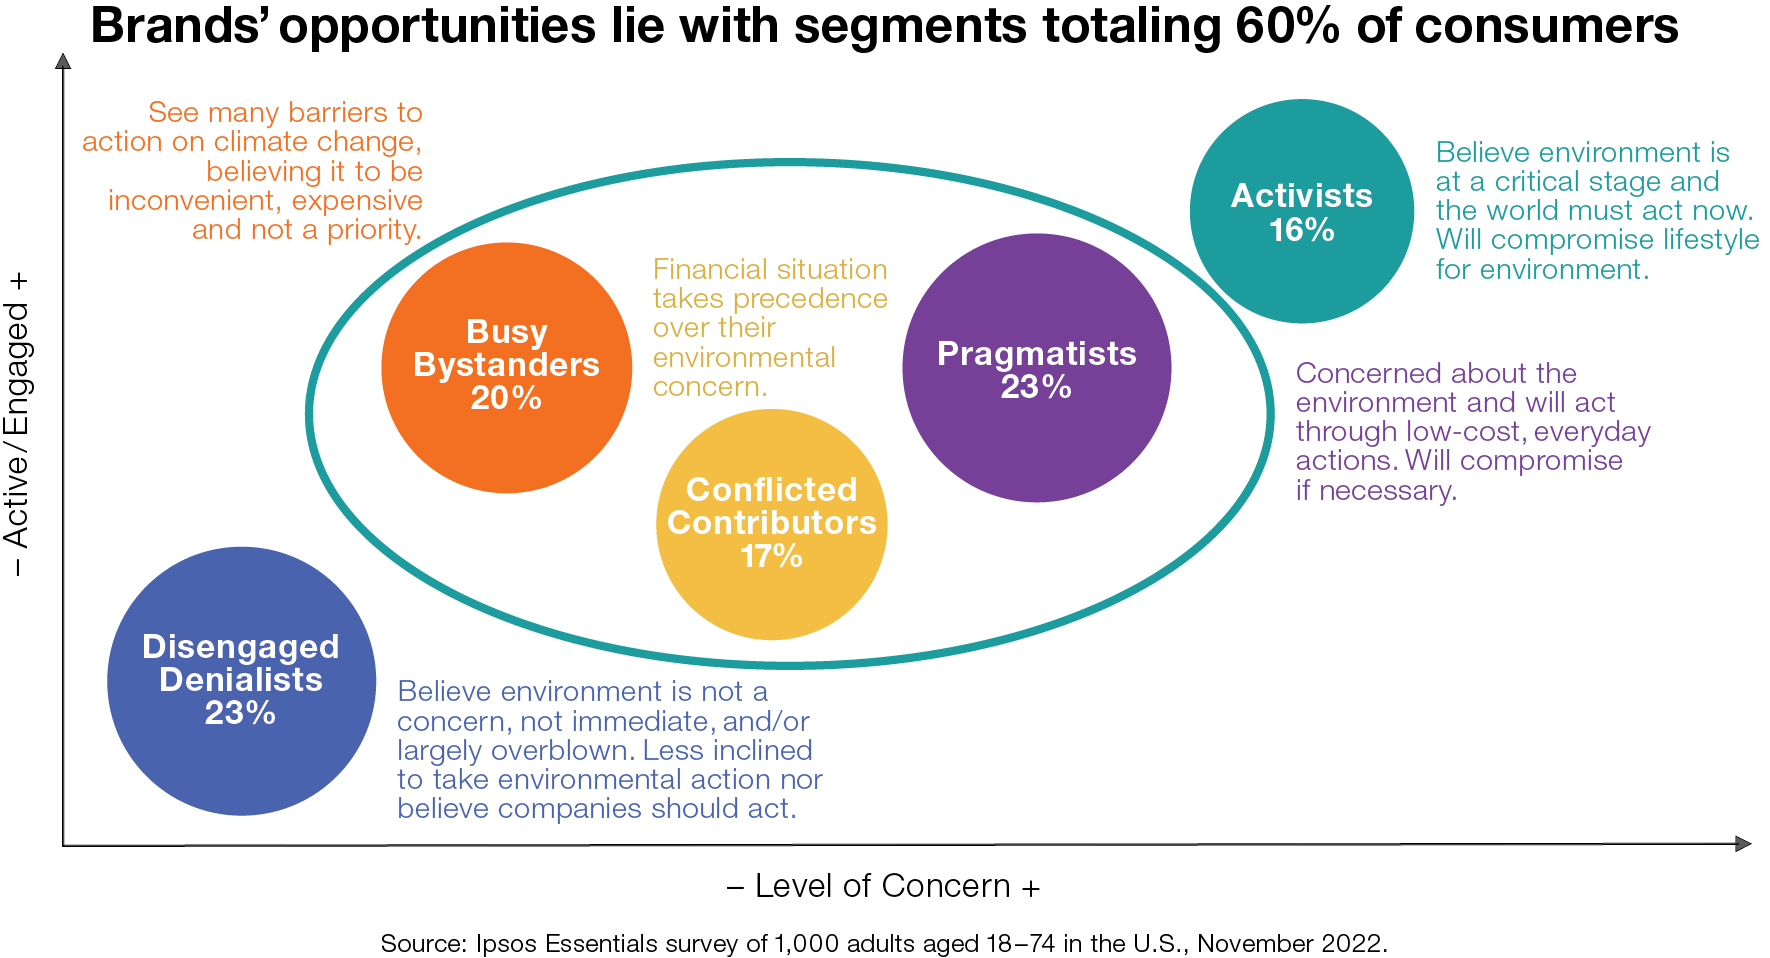 Brands' opportunities lie with segments totaling 60% of consumers